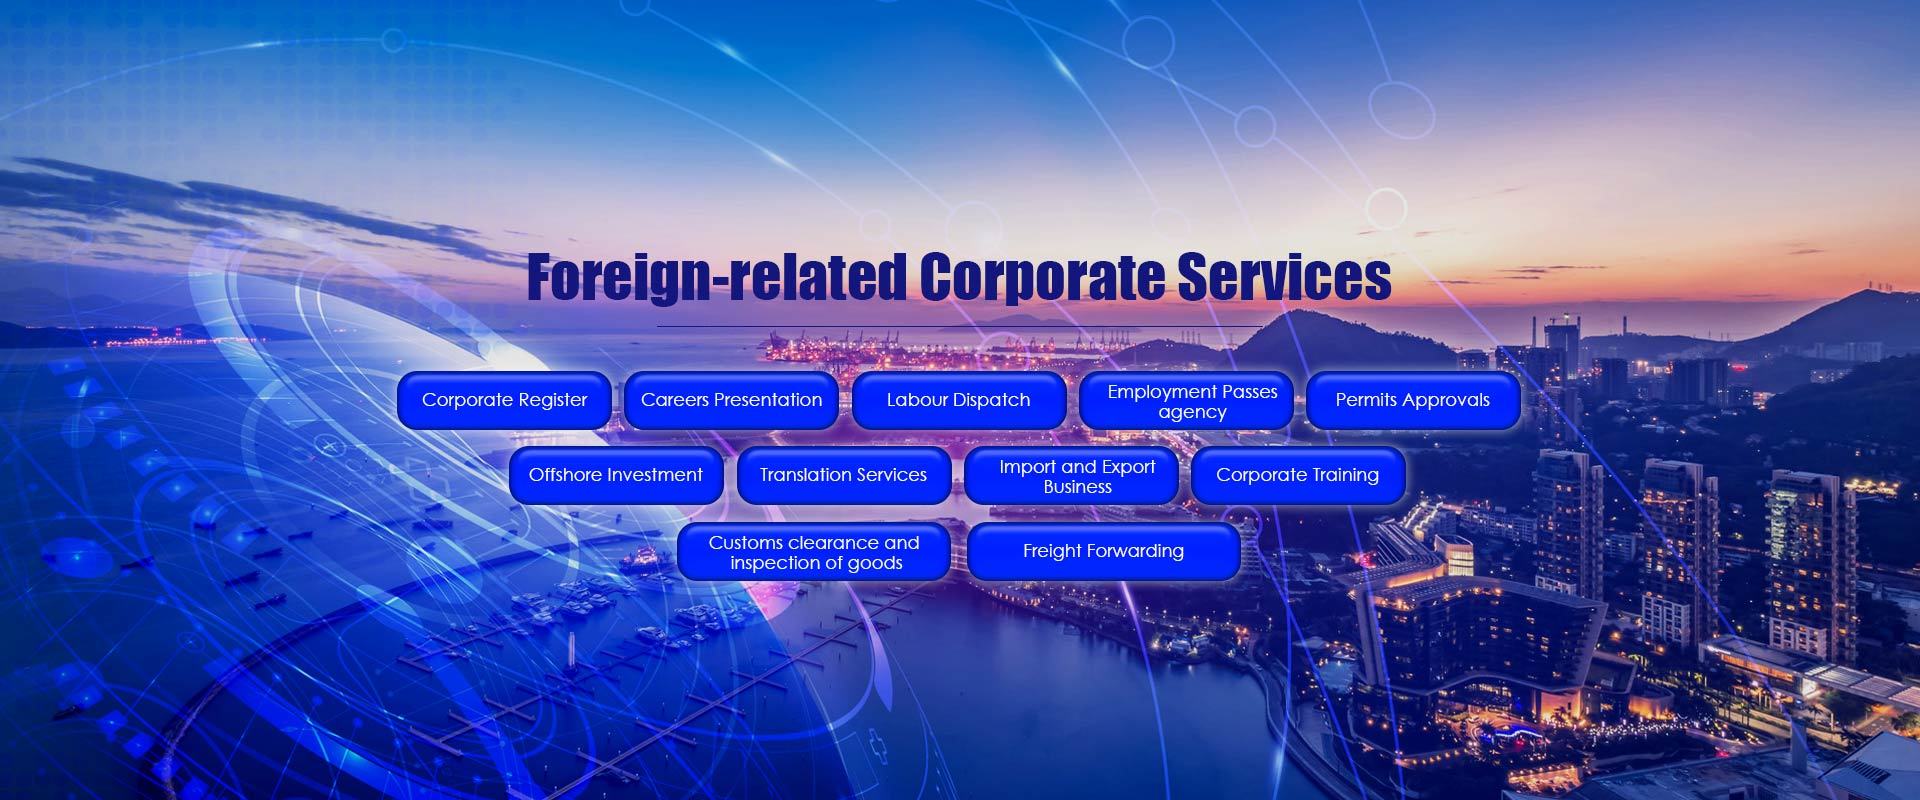 Foreign-related Corporate Services